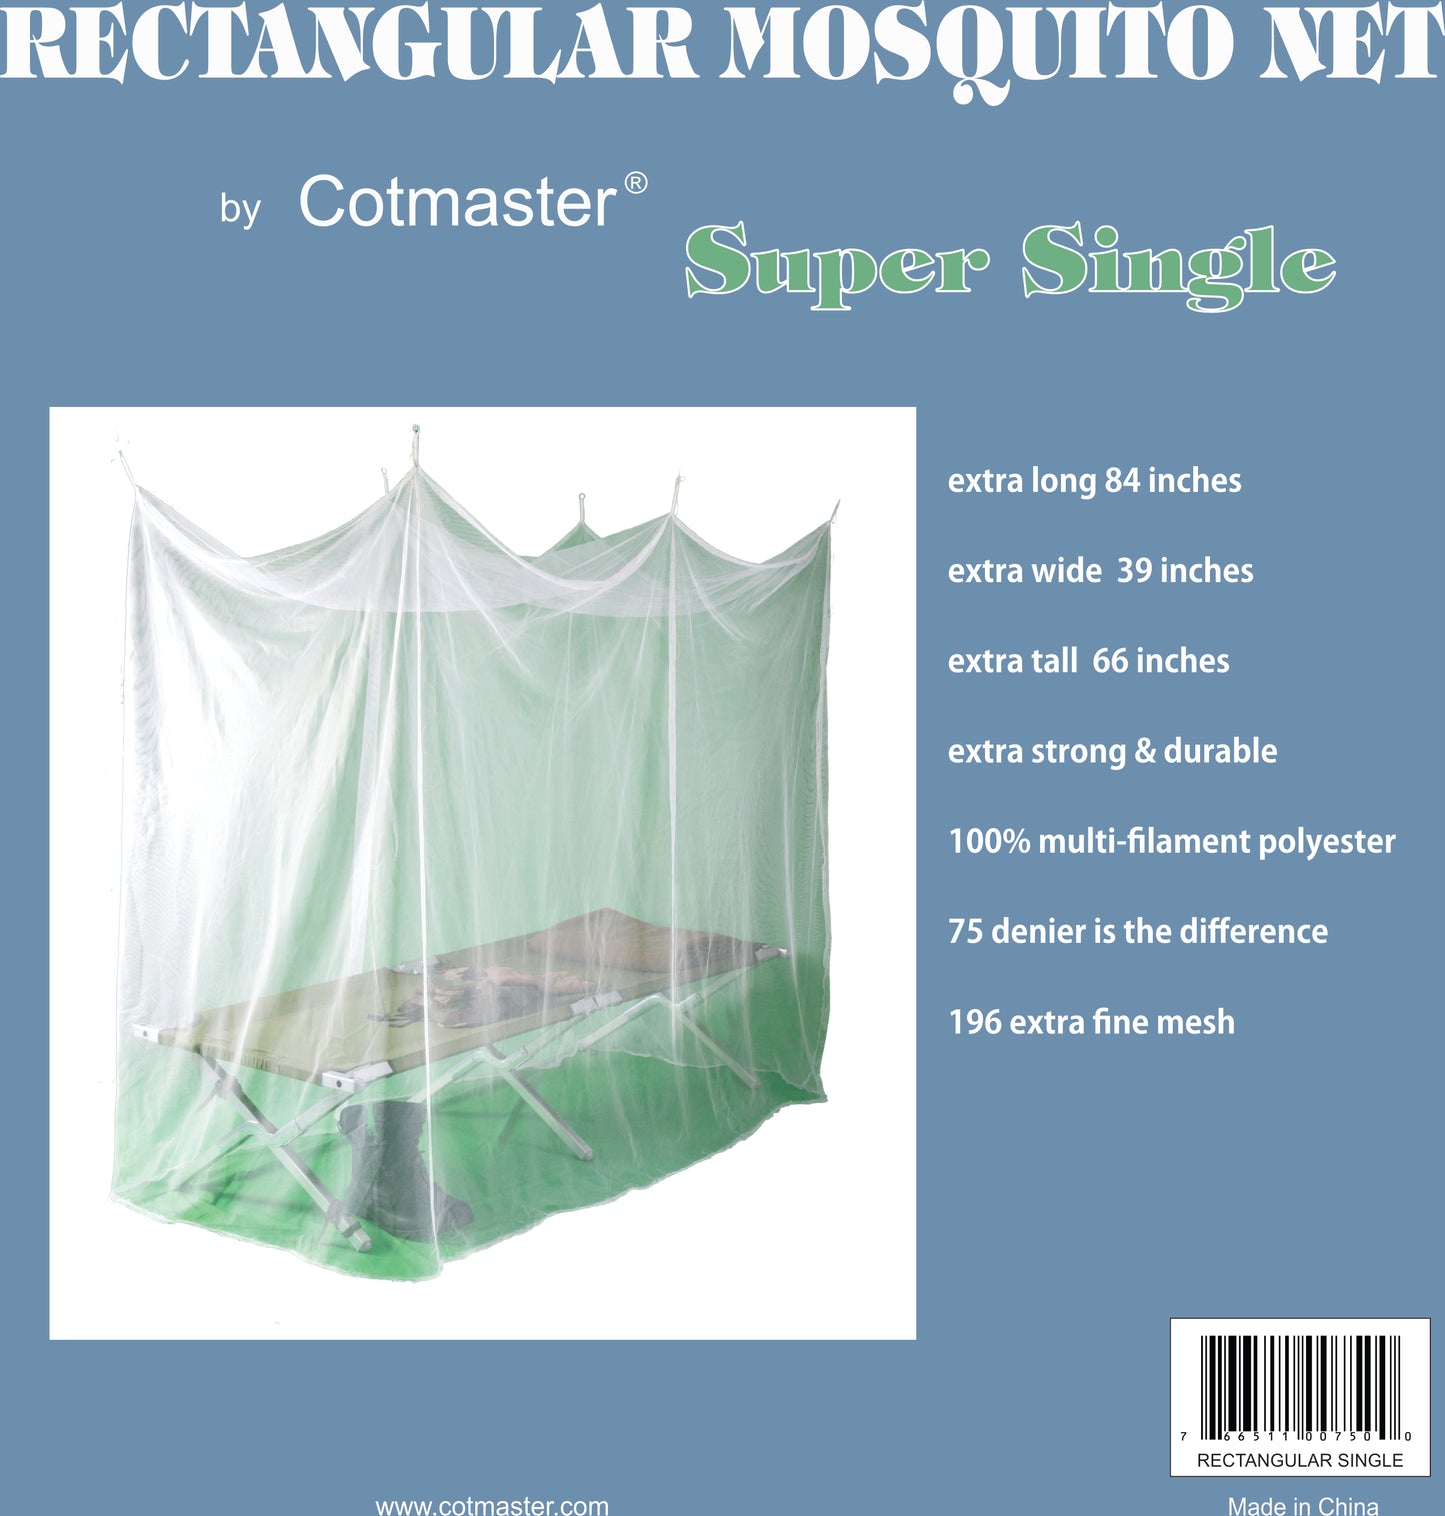 Cotmaster Rectangular Mosquito net in package